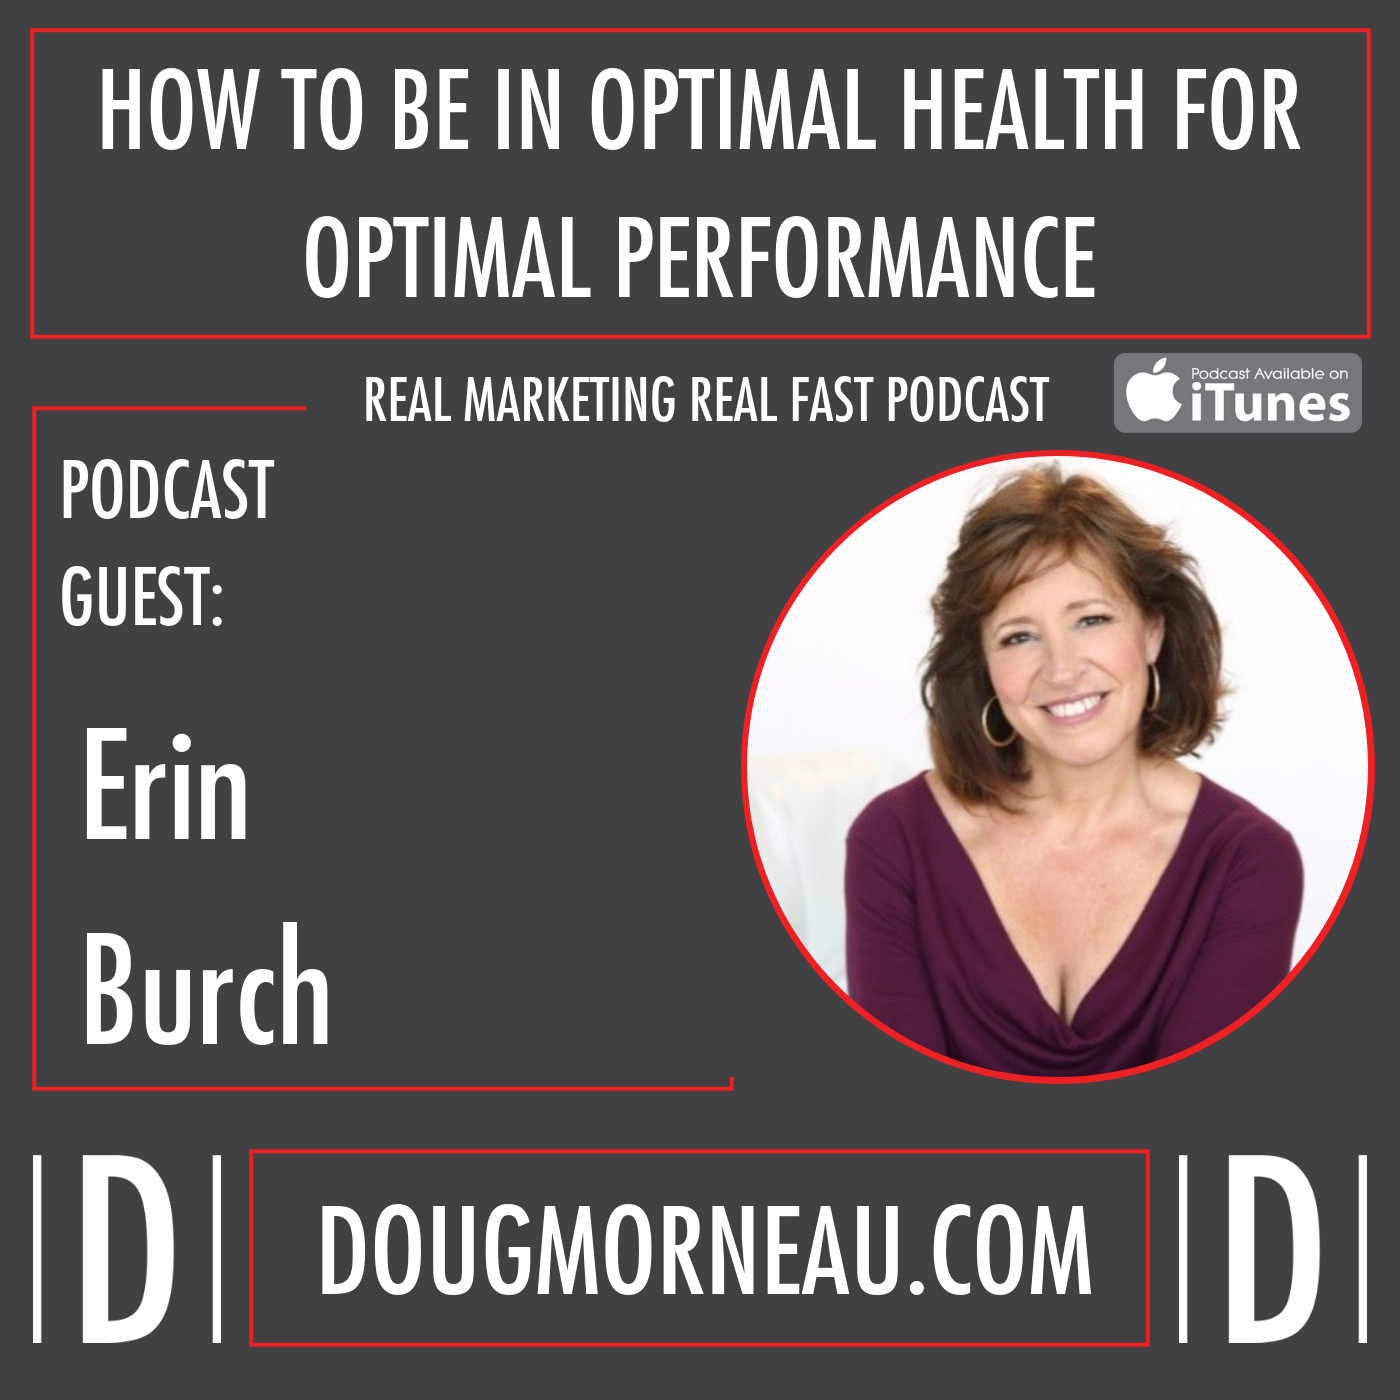 HOW TO BE IN OPTIMAL HEALTH FOR OPTIMAL PERFORMANCE ERIN BURCH - DOUG MORNEAU - REAL MARKETING REAL FAST PODCAST